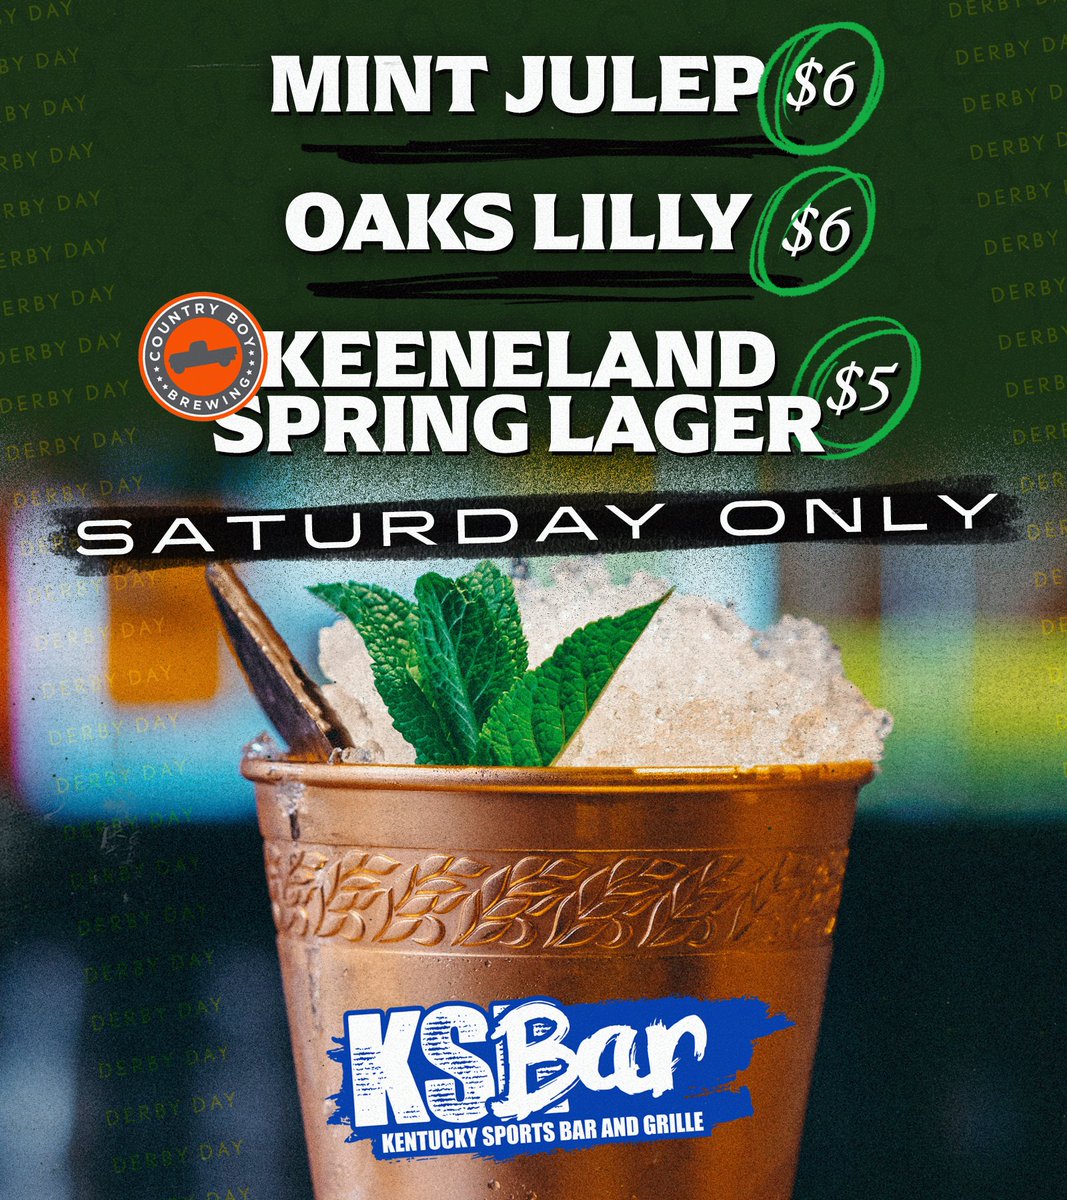 Getting ready for the Kentuckiest day of the year the best way we know how. Saturday only: $6 Mint Juleps $6 Oaks Lilly $5 Keeneland Spring Lager Do Derby with us after you watch Kentucky Baseball vs Arkansas at 2pm at KPP.